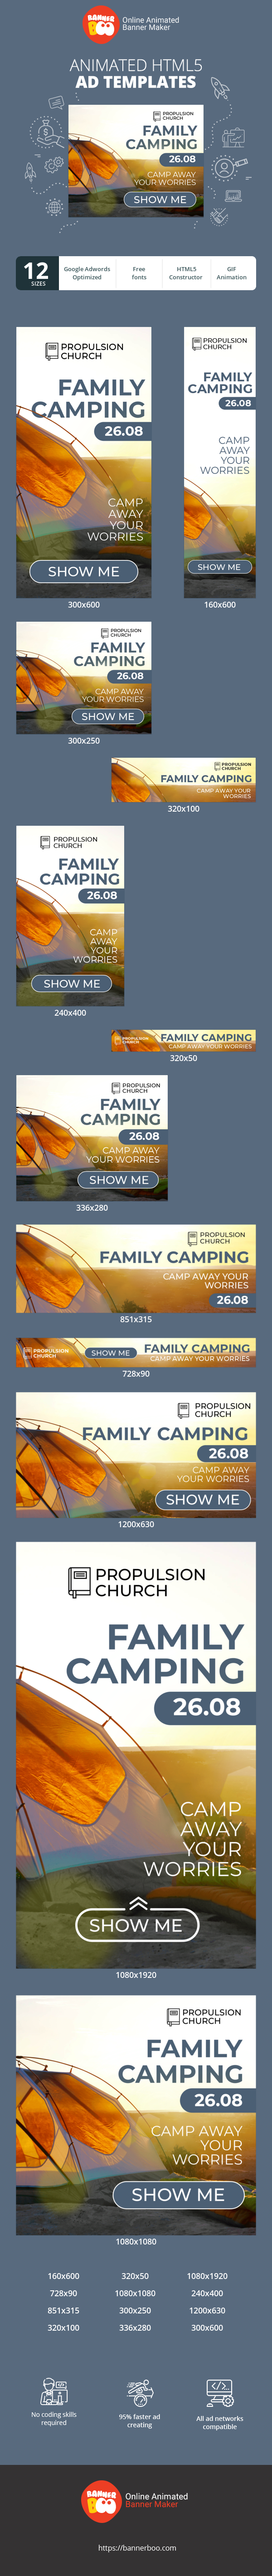 Szablon reklamy banerowej — Family Camping — 26.08 Camp Away Your Worries